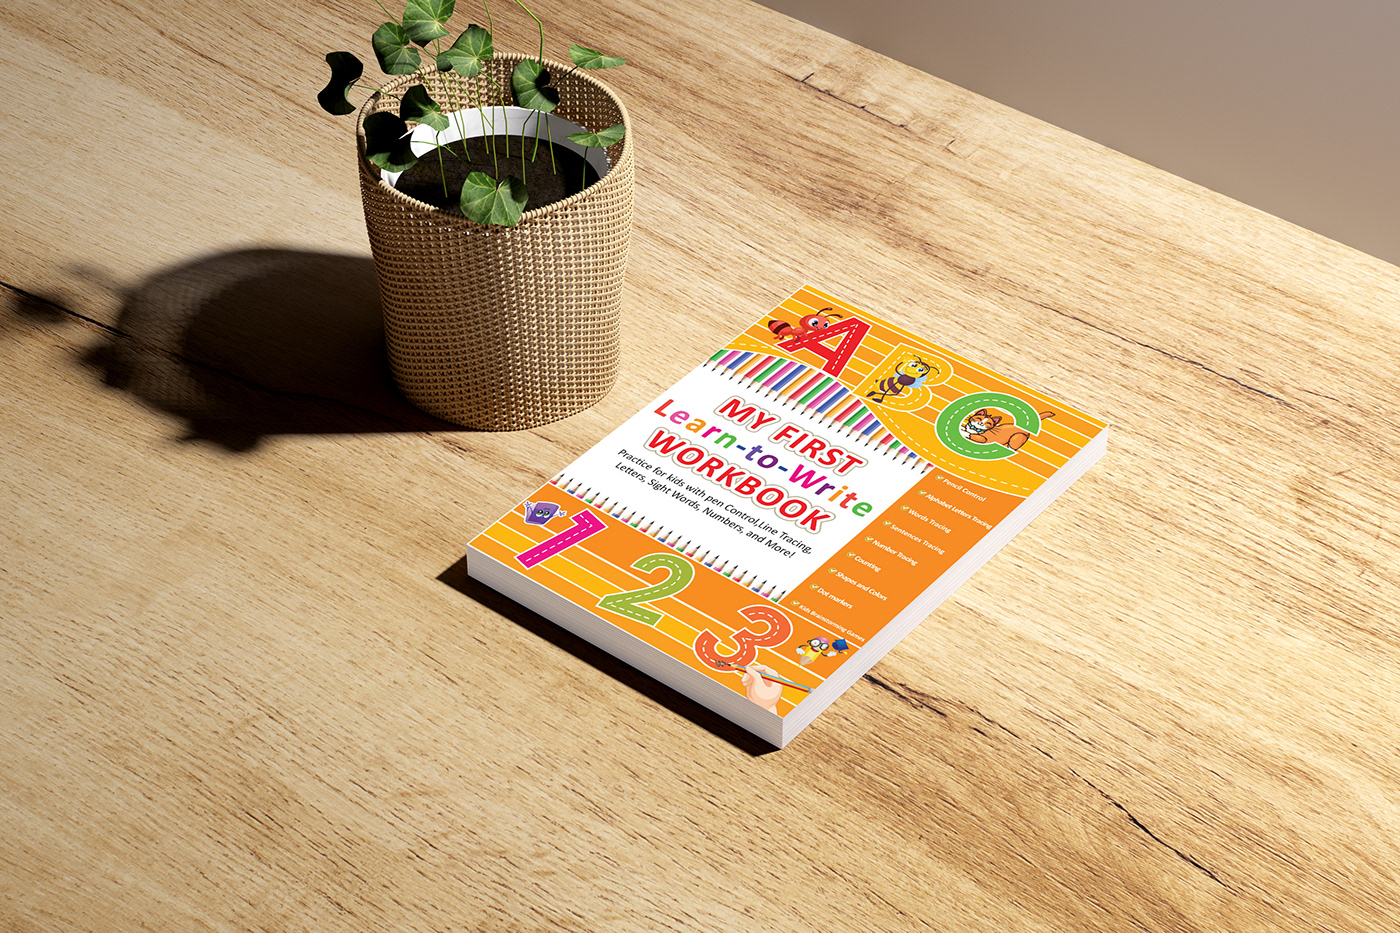 KDP book cover KDP Interior kdp coloring book Paperback Cover book design book cover kids book children's back to school Kindle Direct Publishing